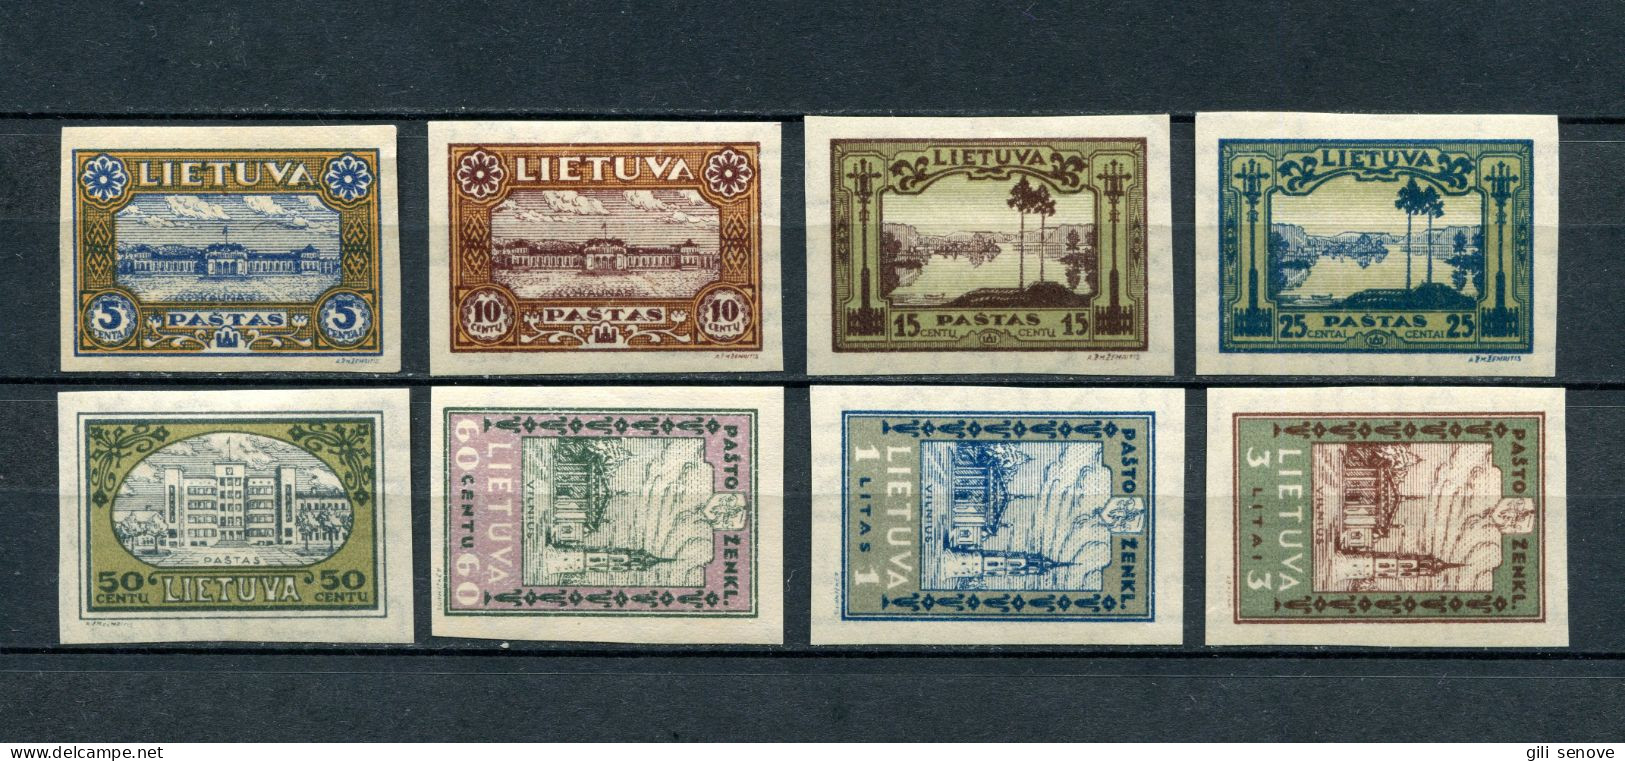 Lithuania 1932 Mi. 316B-323B Sc 256a –263a Lithuanian Scenes Imperforated MH* - Lithuania